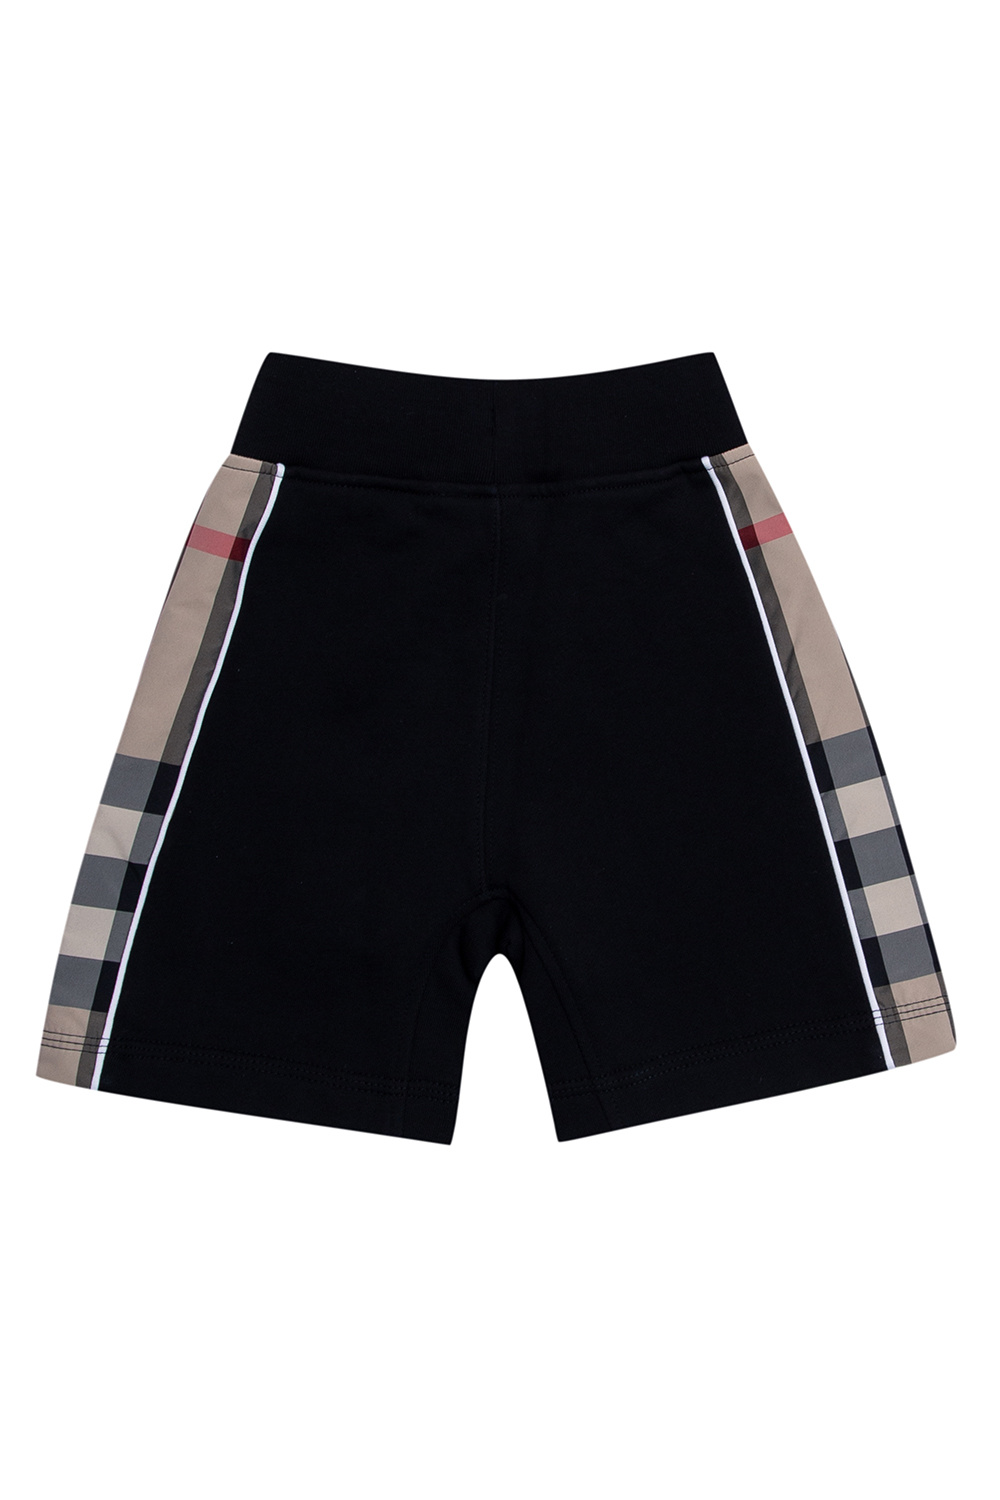 burberry QUILTED Kids Sweat shorts